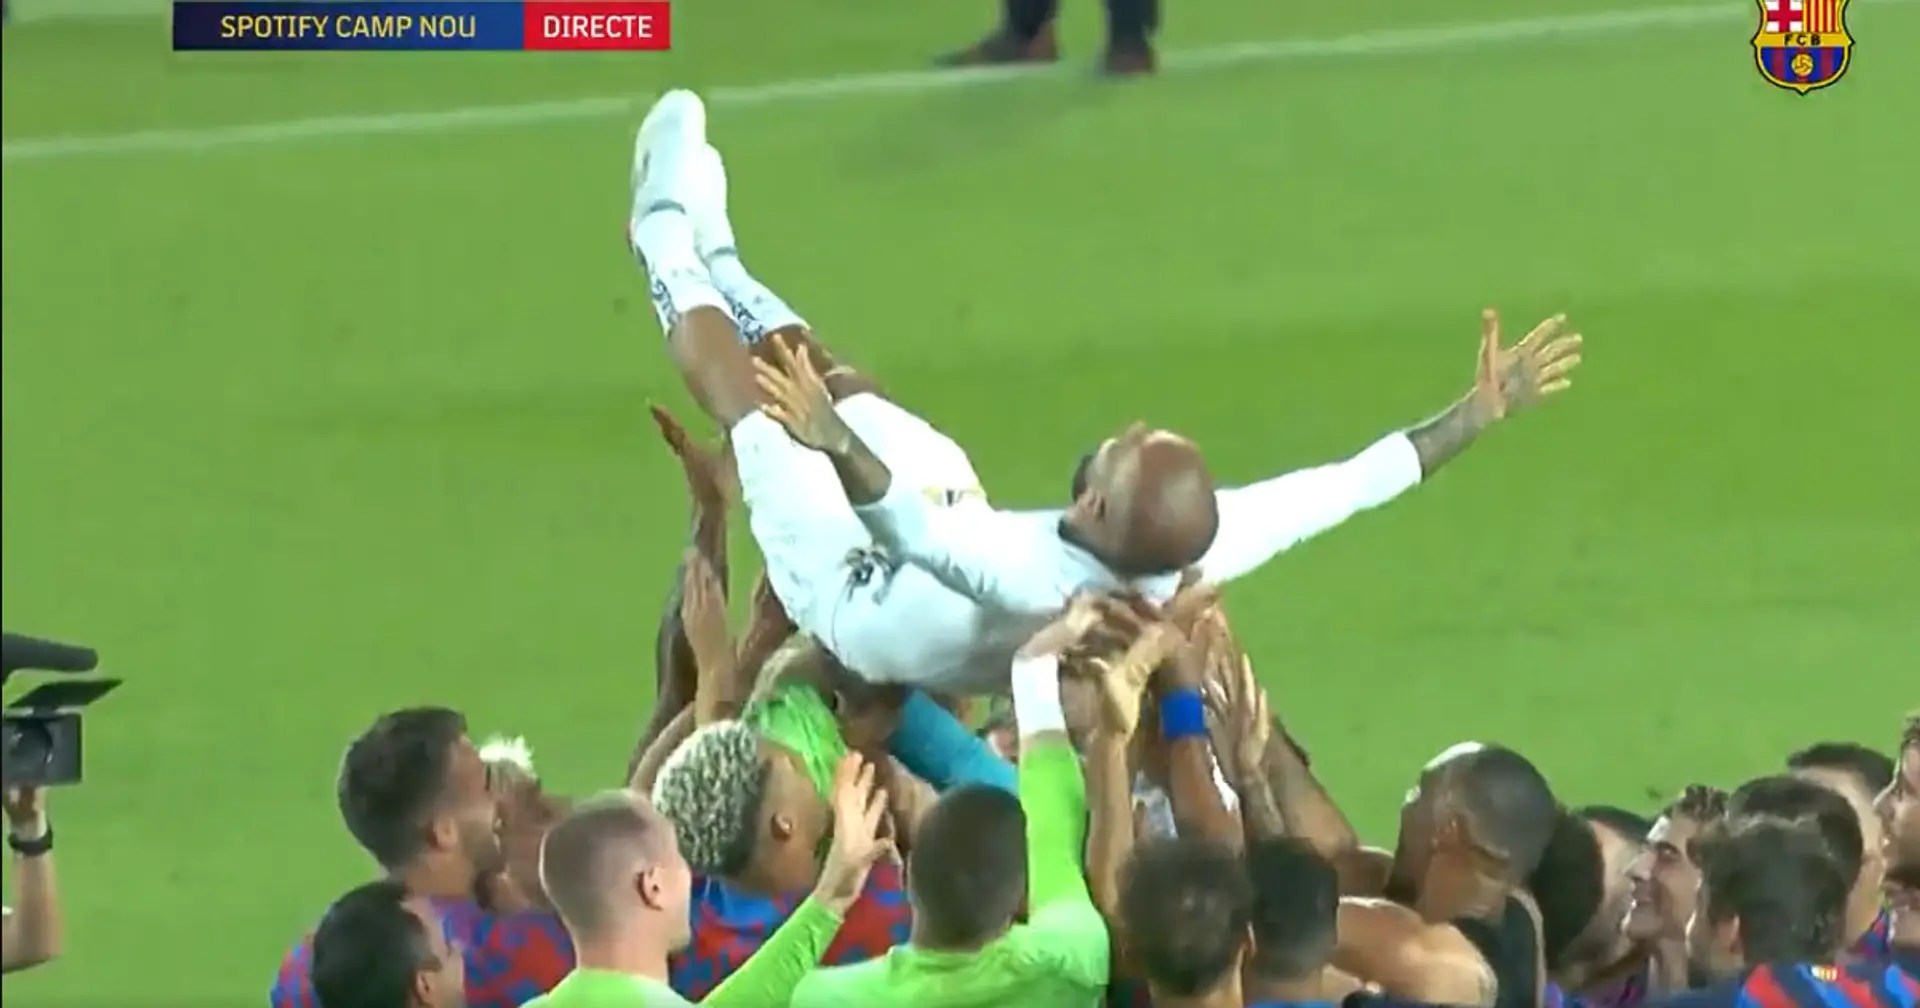 132f48af af3c 43ef 990b d3f5e59612e0?width=1920&quality=75 Barca players celebrate Dani Alves greatness with touching act